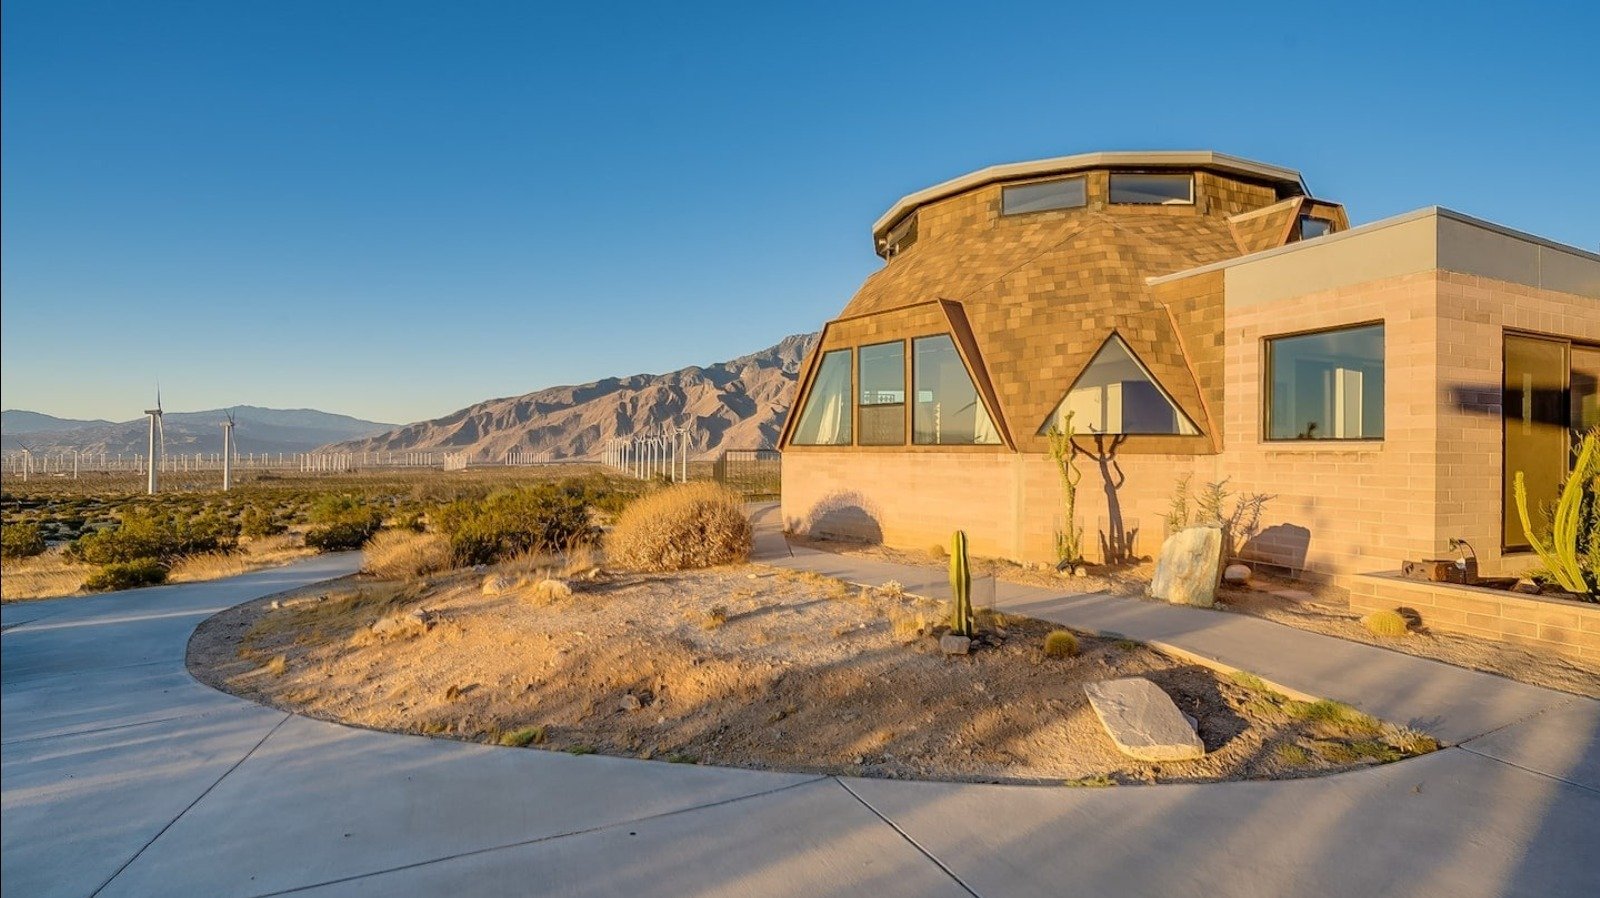 The Most Stunning Airbnb Rentals In Palm Springs